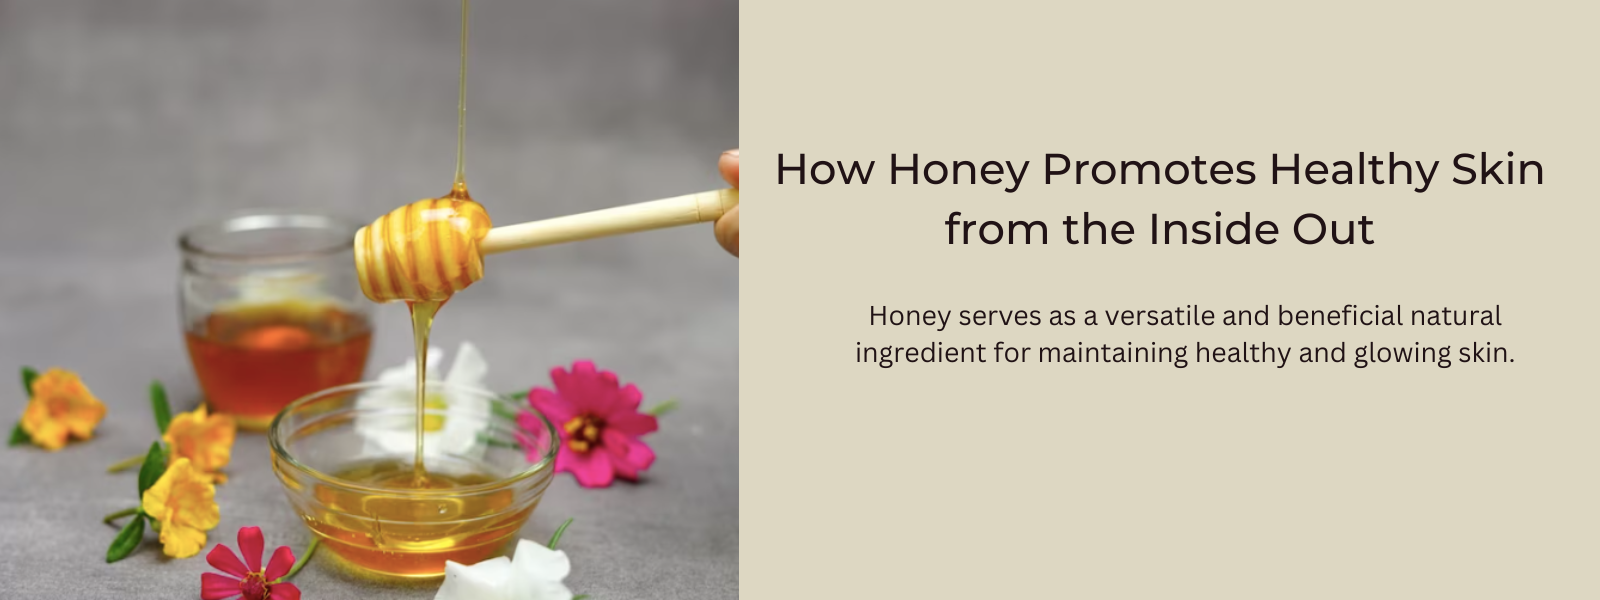 Golden Glow: How Honey Promotes Healthy Skin from the Inside Out